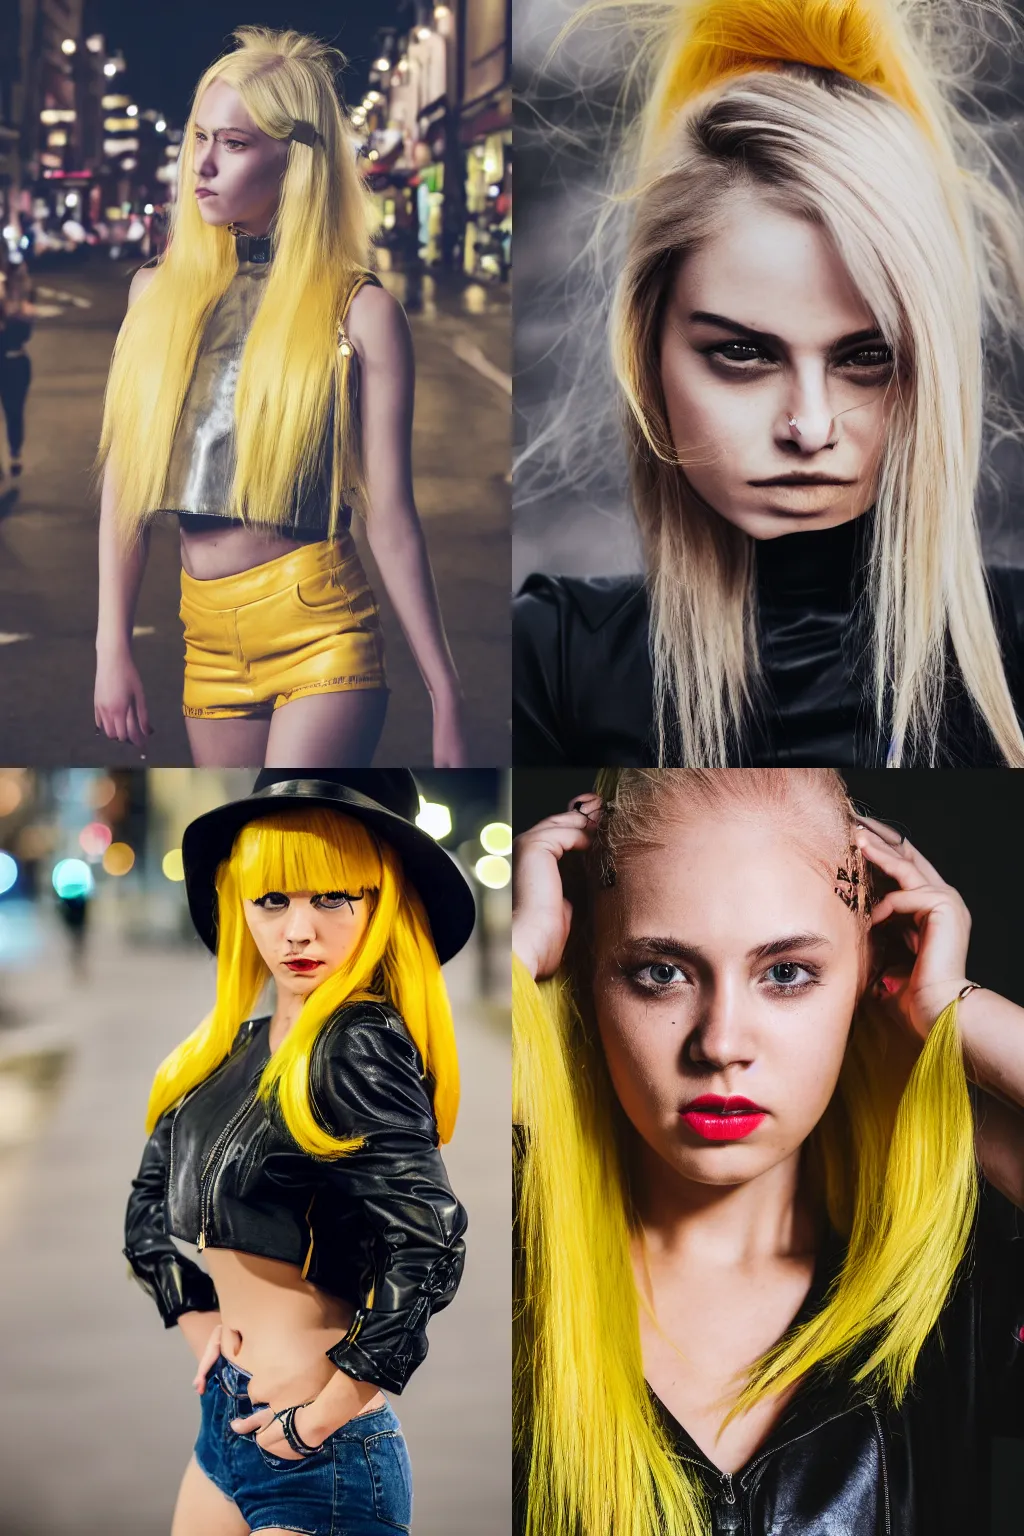 Prompt: 5 5 mm portrait photo of a girl with yellow hair wearing a leather crop top walking on a night street, 4 k photo, close up portrait